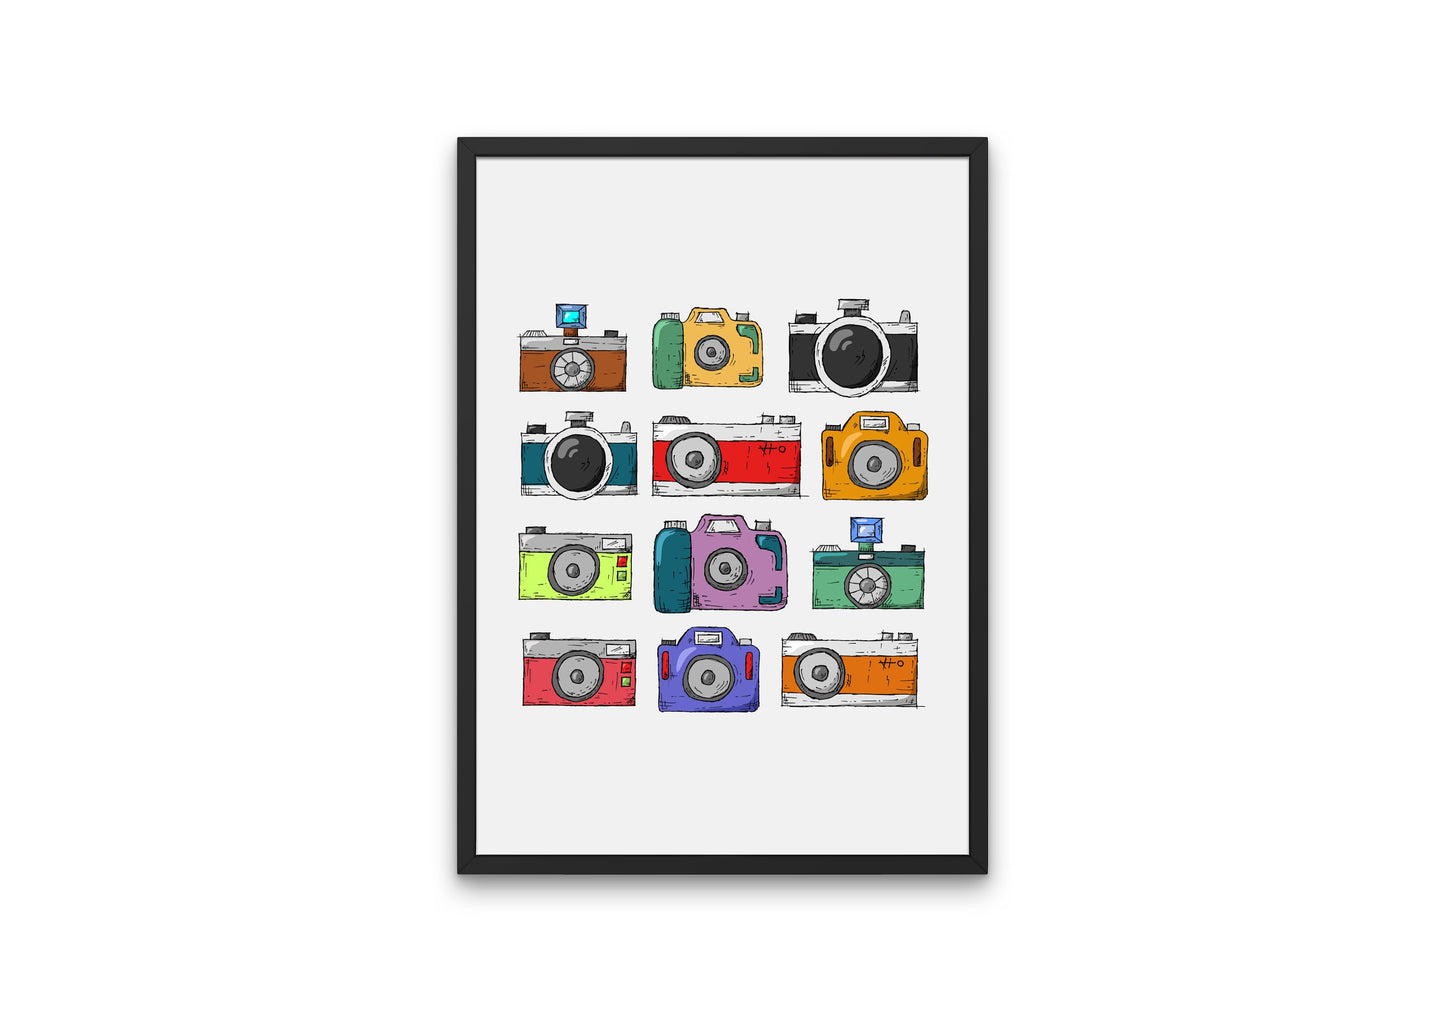 Vintage Colorful Camera Poster INSTANT DOWNLOAD, one piece poster, vintage decor, old camera, canon camera, camera art, lights camera action